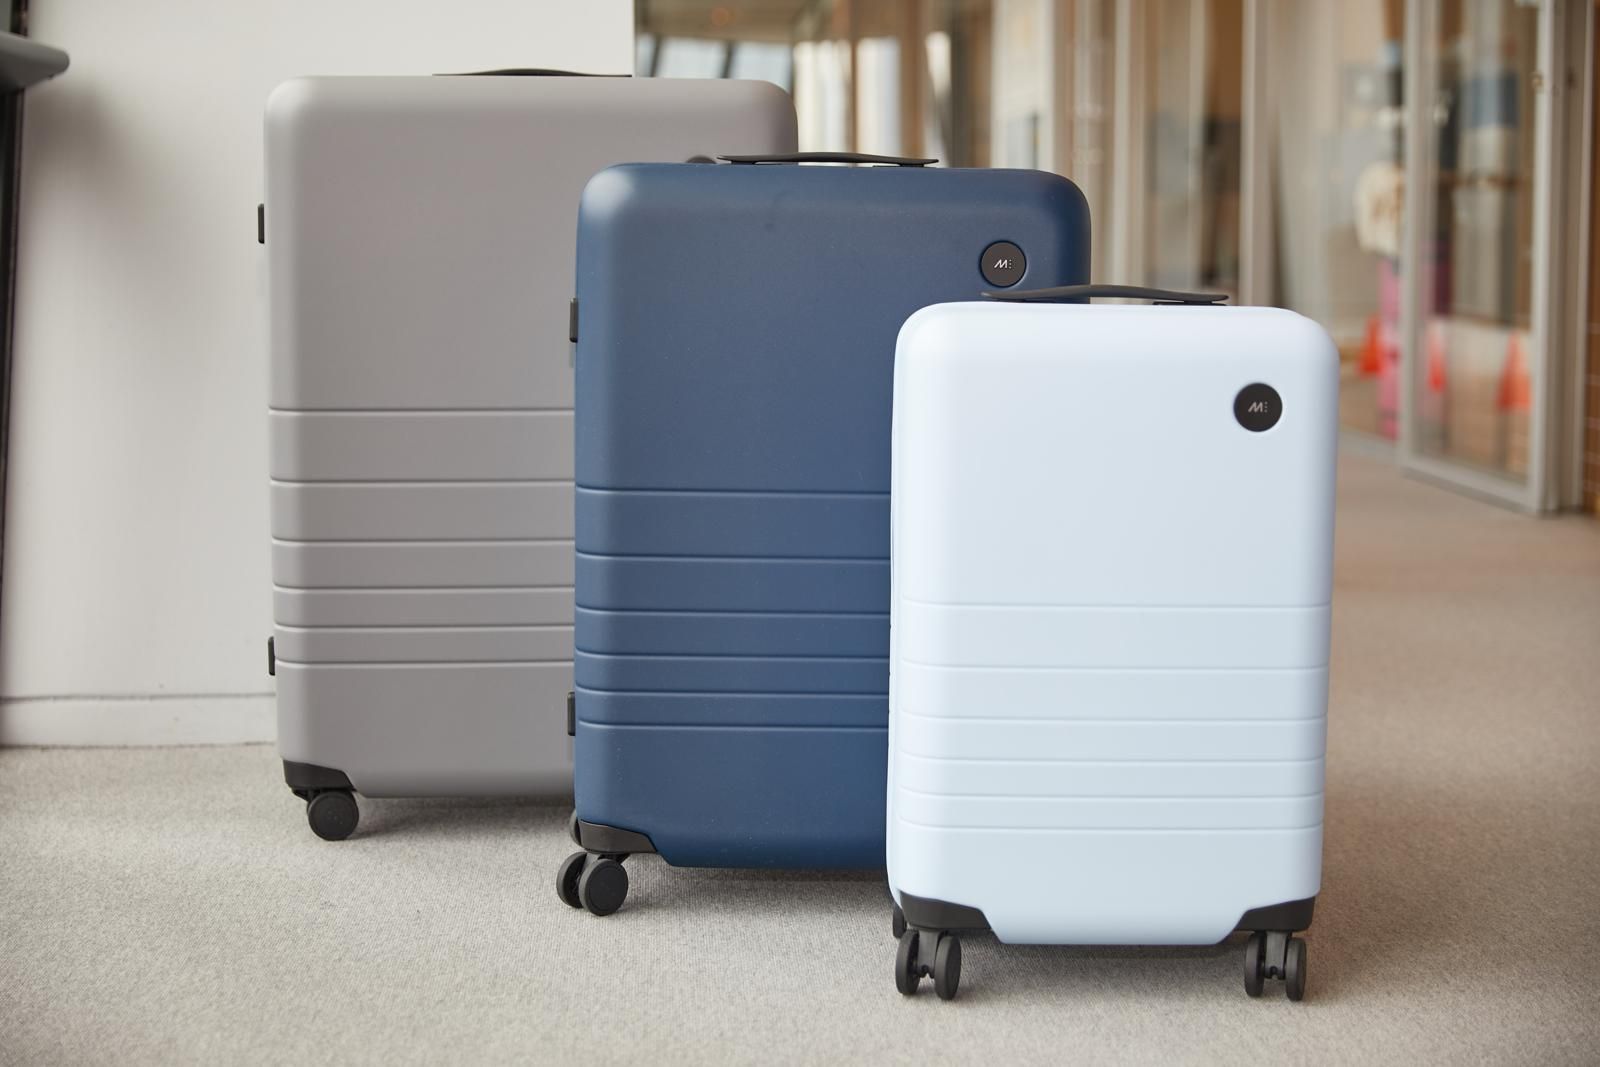 Why Rimowa is the Gold Standard for Luggage — How Rimowa is Made